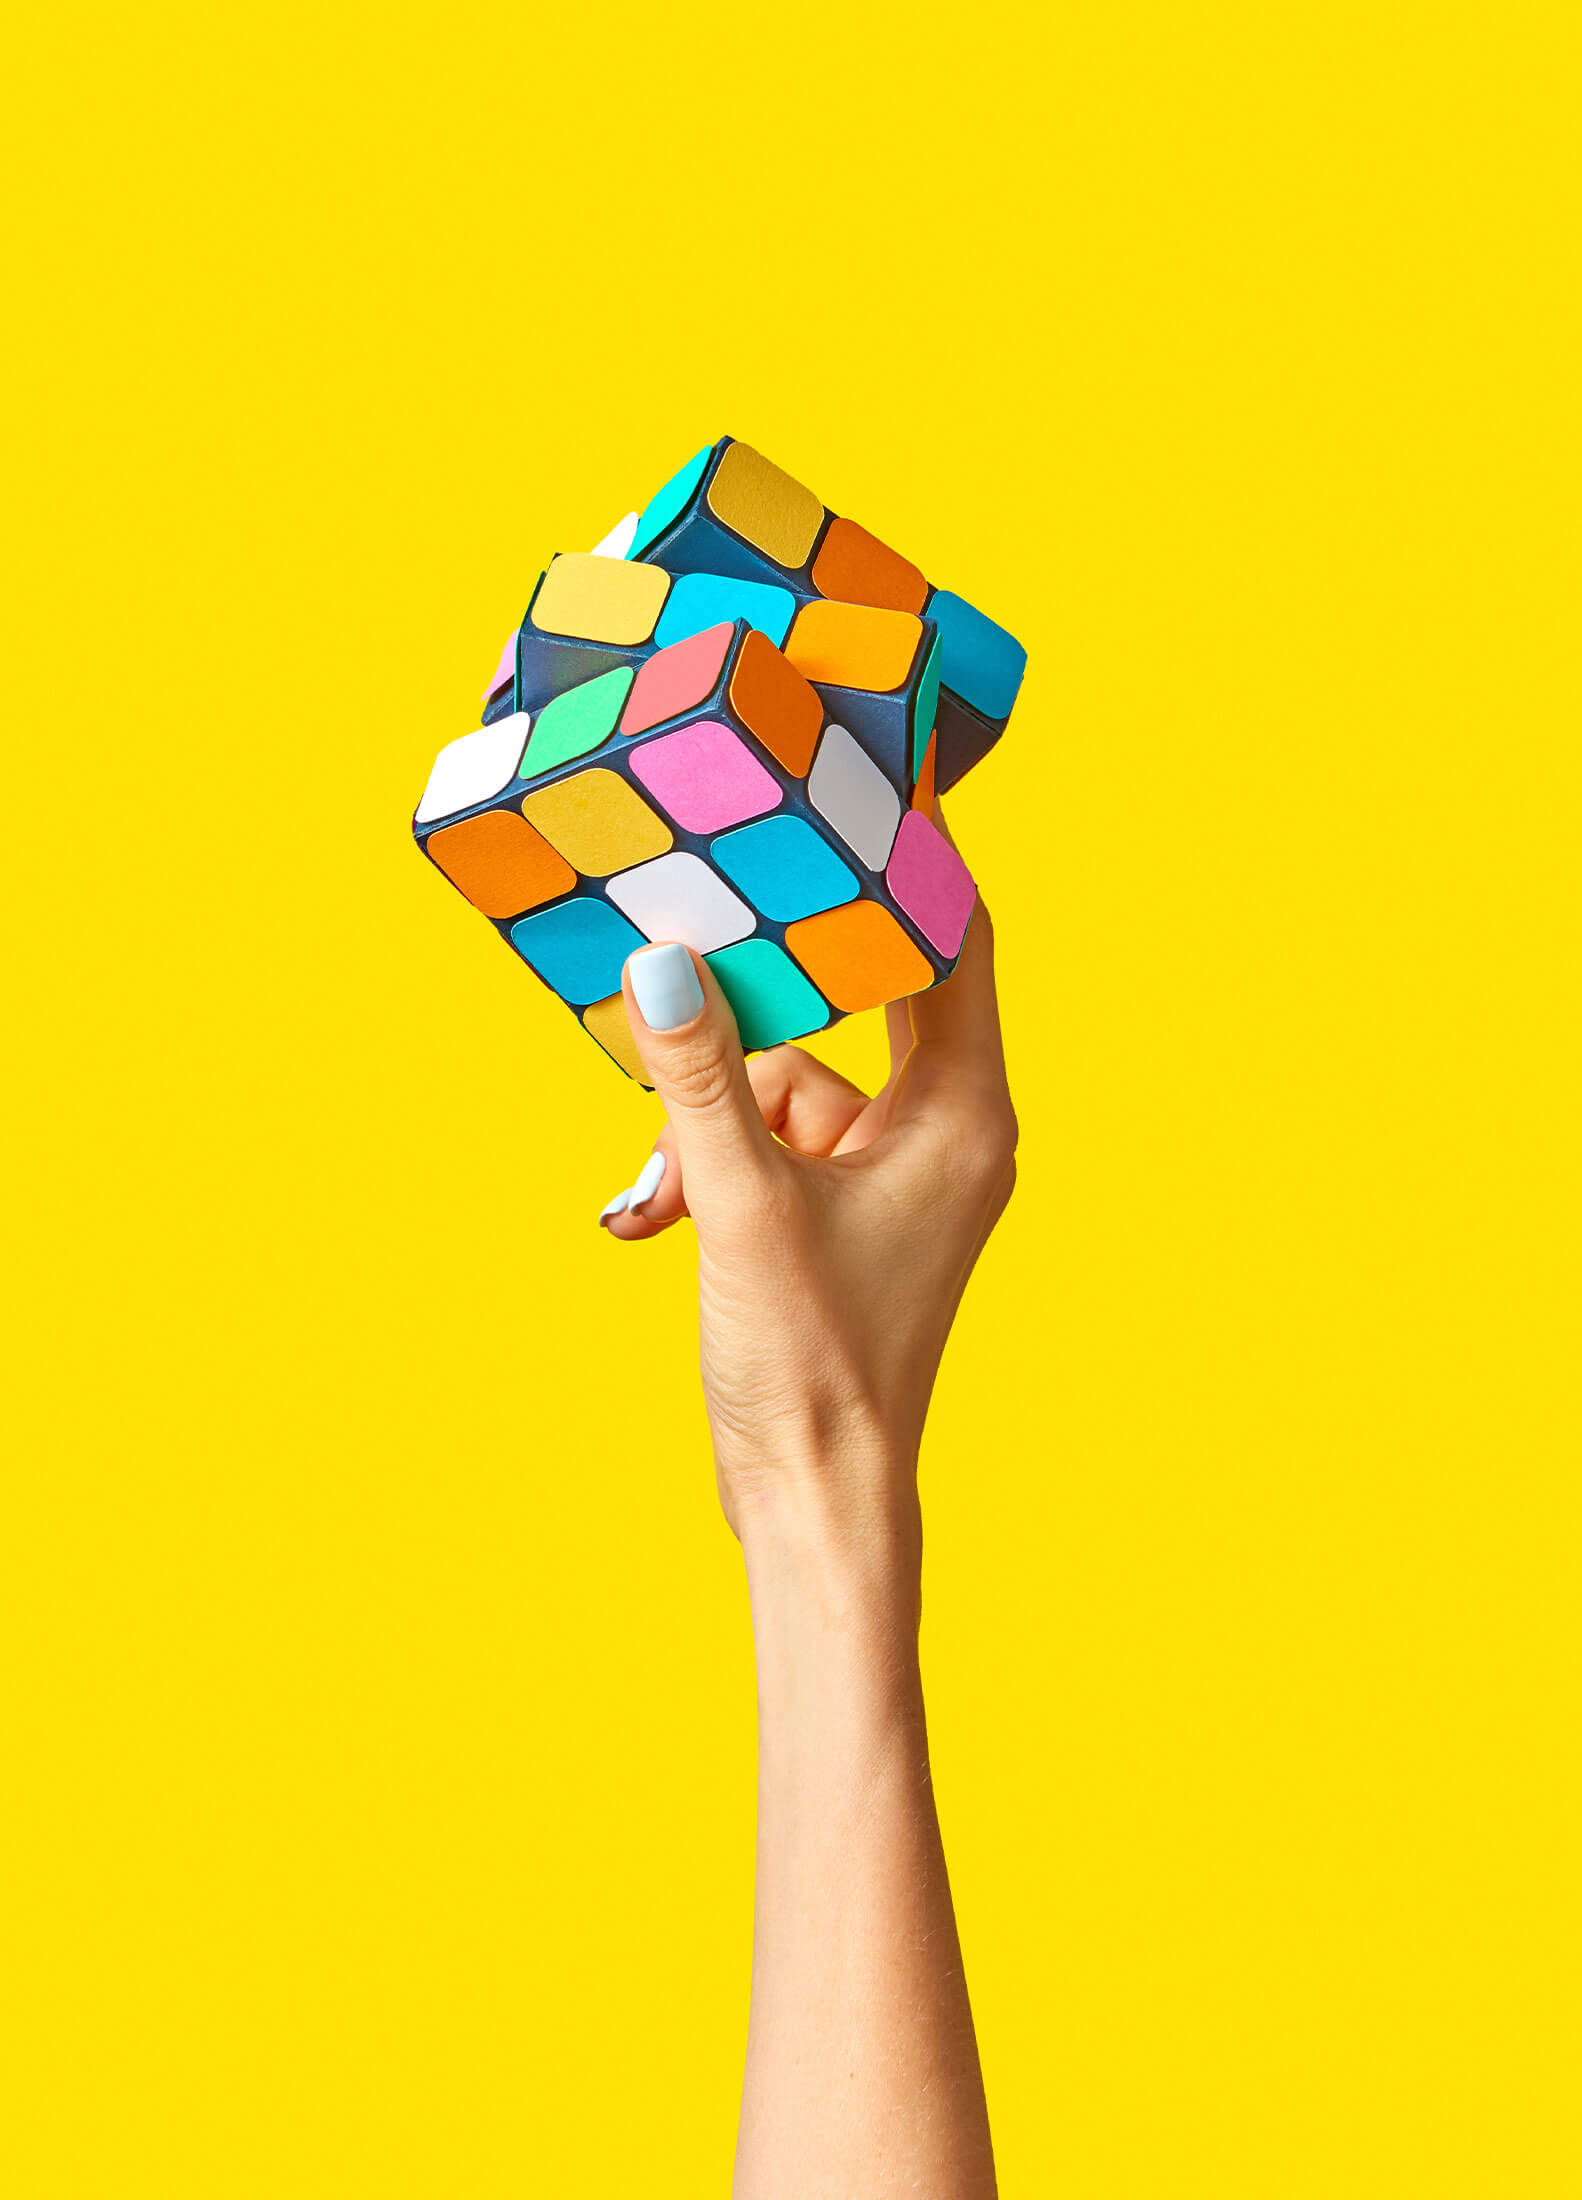 Isolated hand holding a rubik's cube in front of a bright yellow background